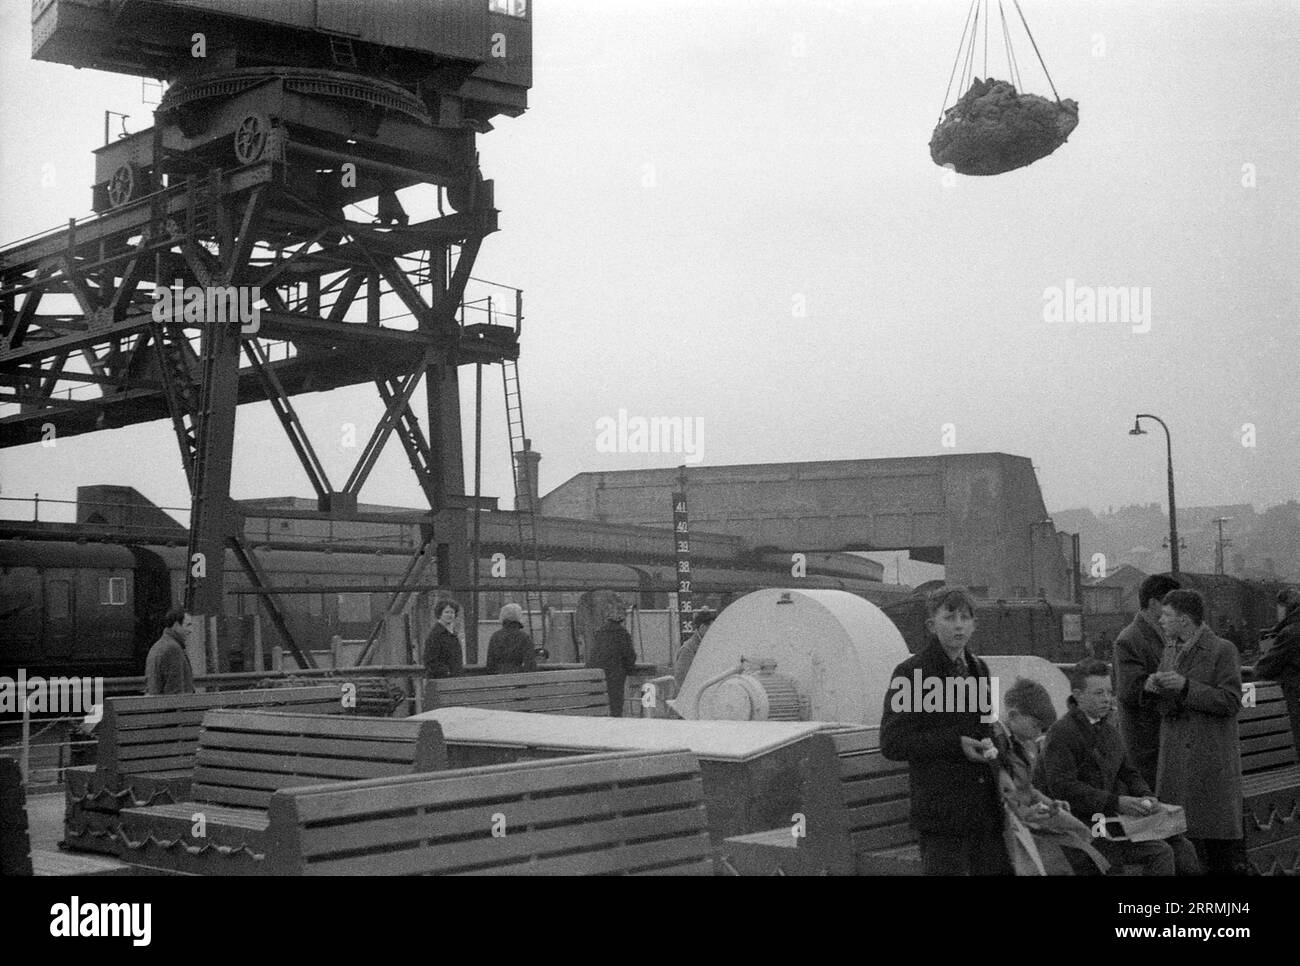 Kent. c.1960 – Passengers on the deck of a French cross-channel ferry at Folkestone Harbour, next to the Folkestone Harbour Railway Station on the harbour arm. A train is at the station. Cargo is being transferred onto the ferry by a quay crane. A group of teenage boys are sitting on a bench, eating lunch. The benches double as life rafts. Stock Photo